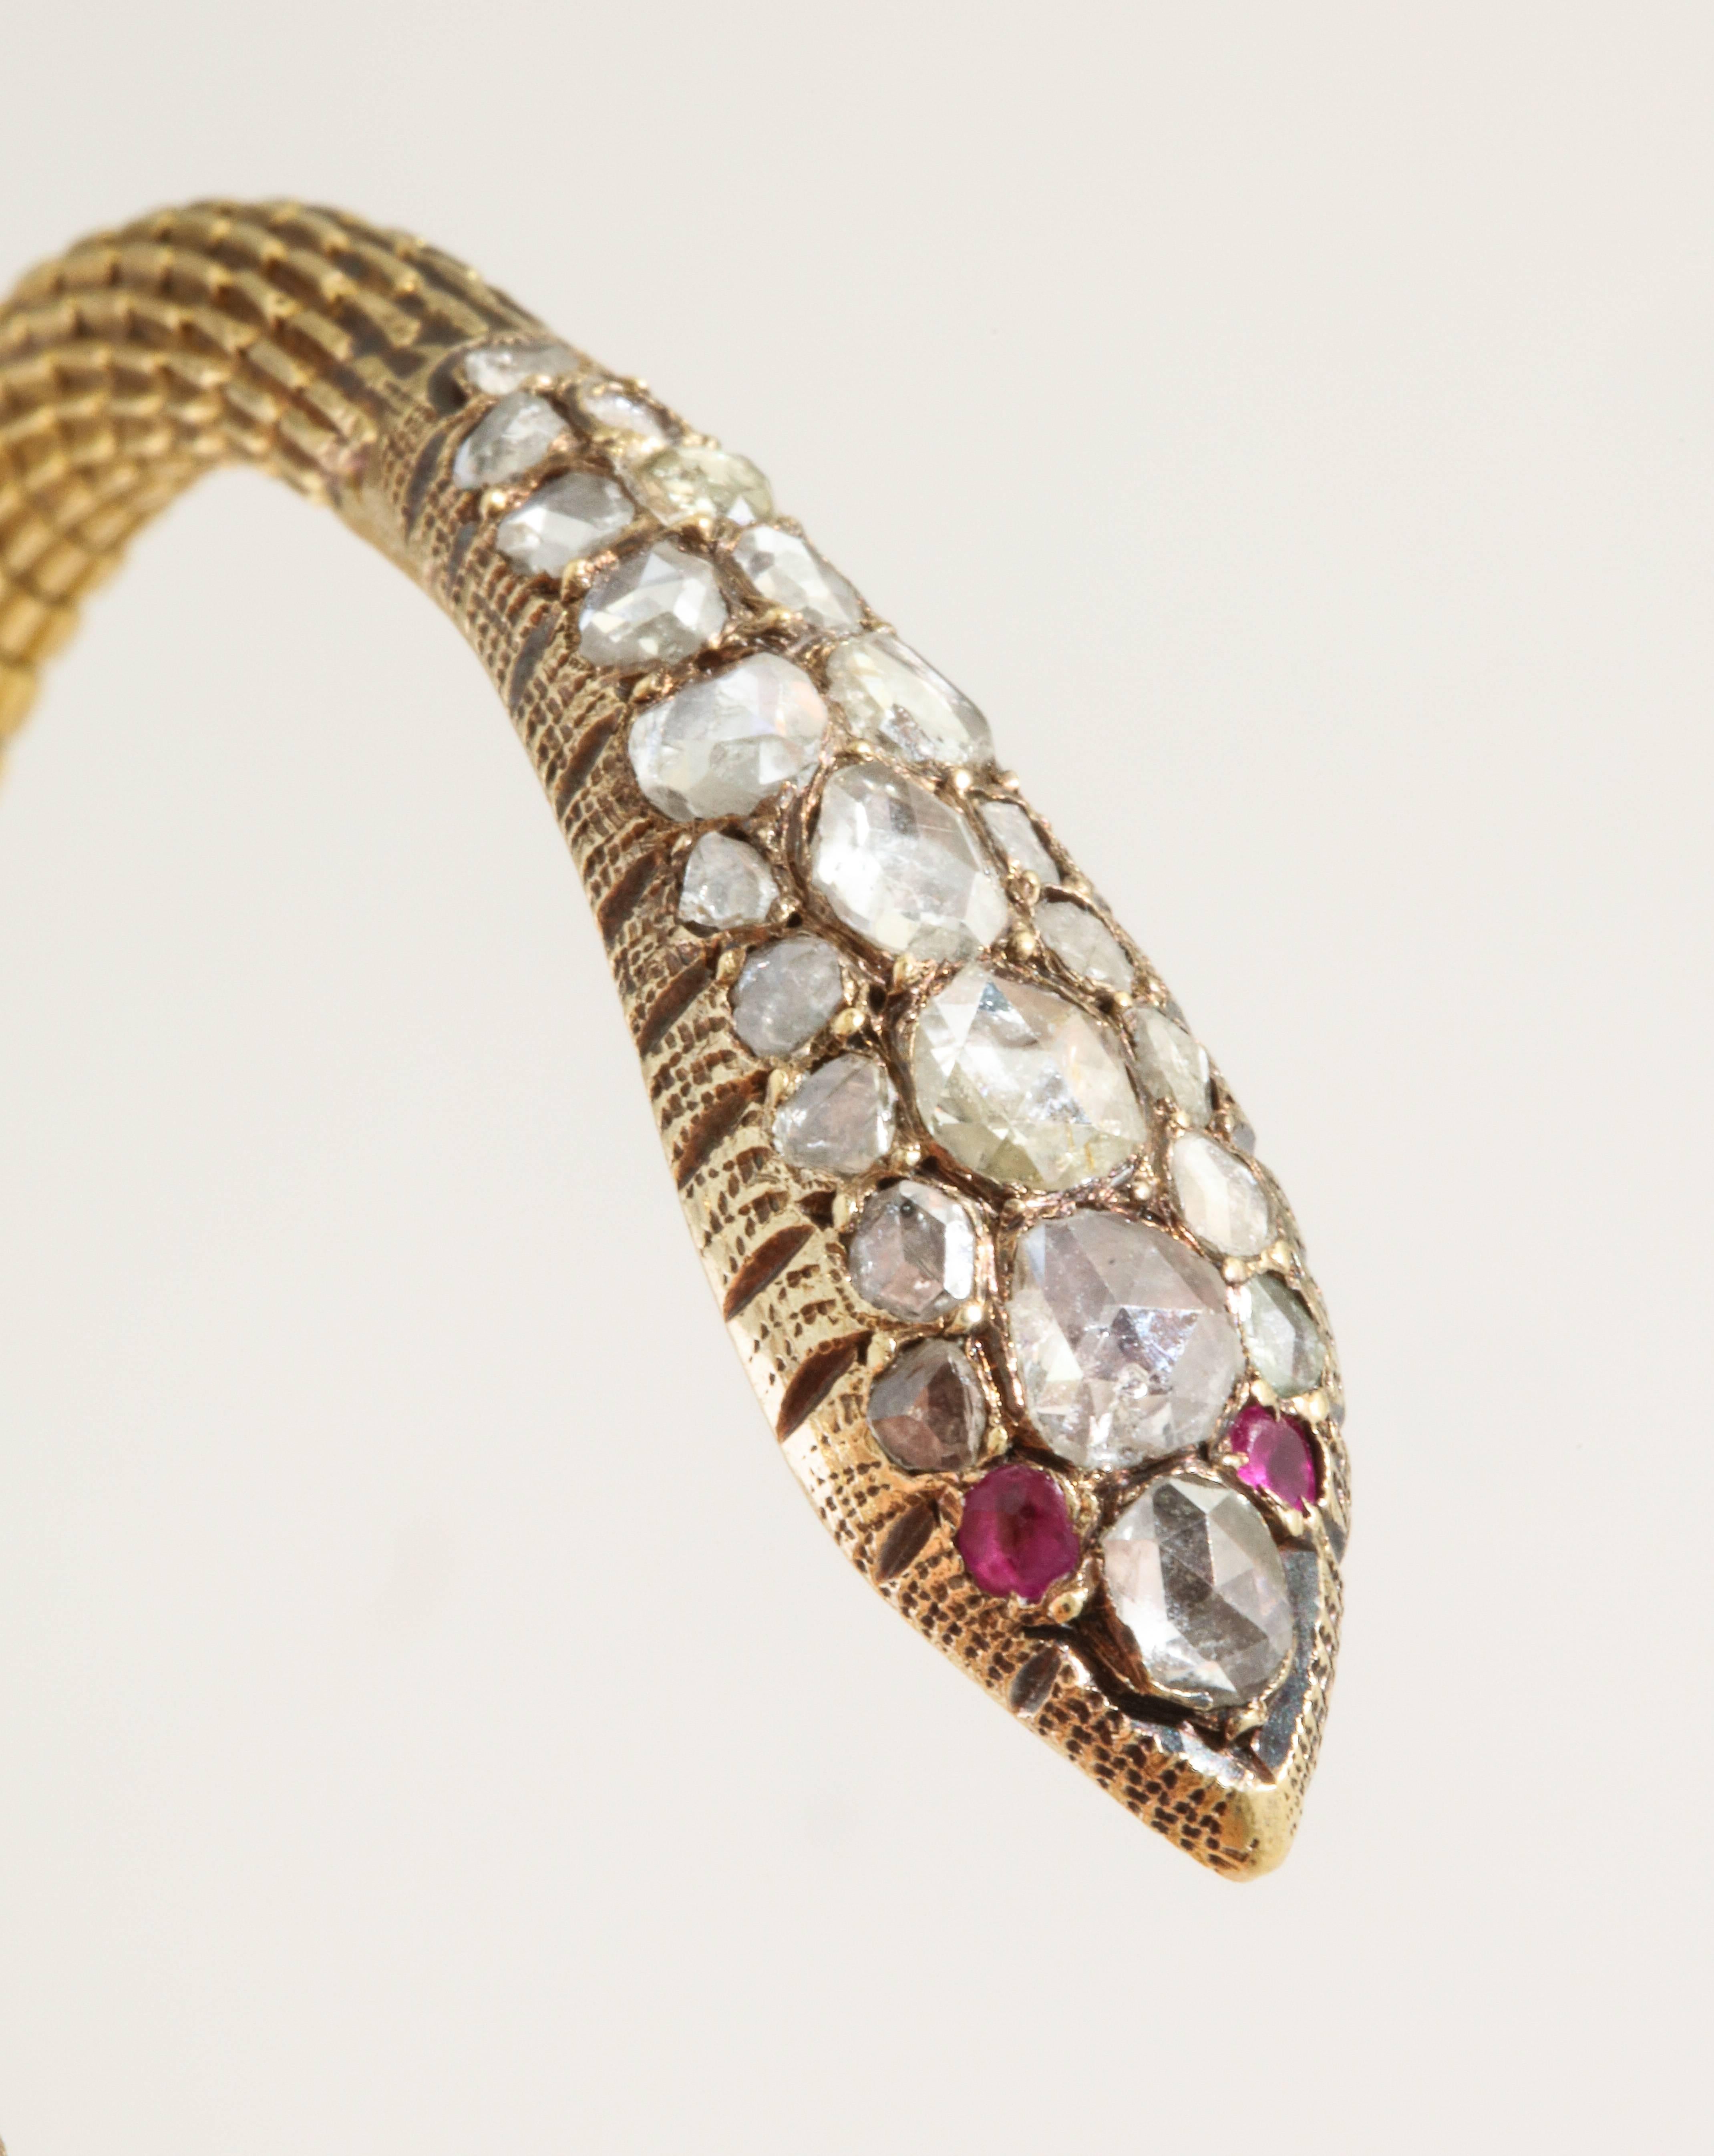 A pair of snake bangles featuring rose cut diamonds with a total estimated weight of 1.5 carats per bangle. The bracelets have an Arabic mark for 21 karat gold. Circa 1960s. Likely Syrian.